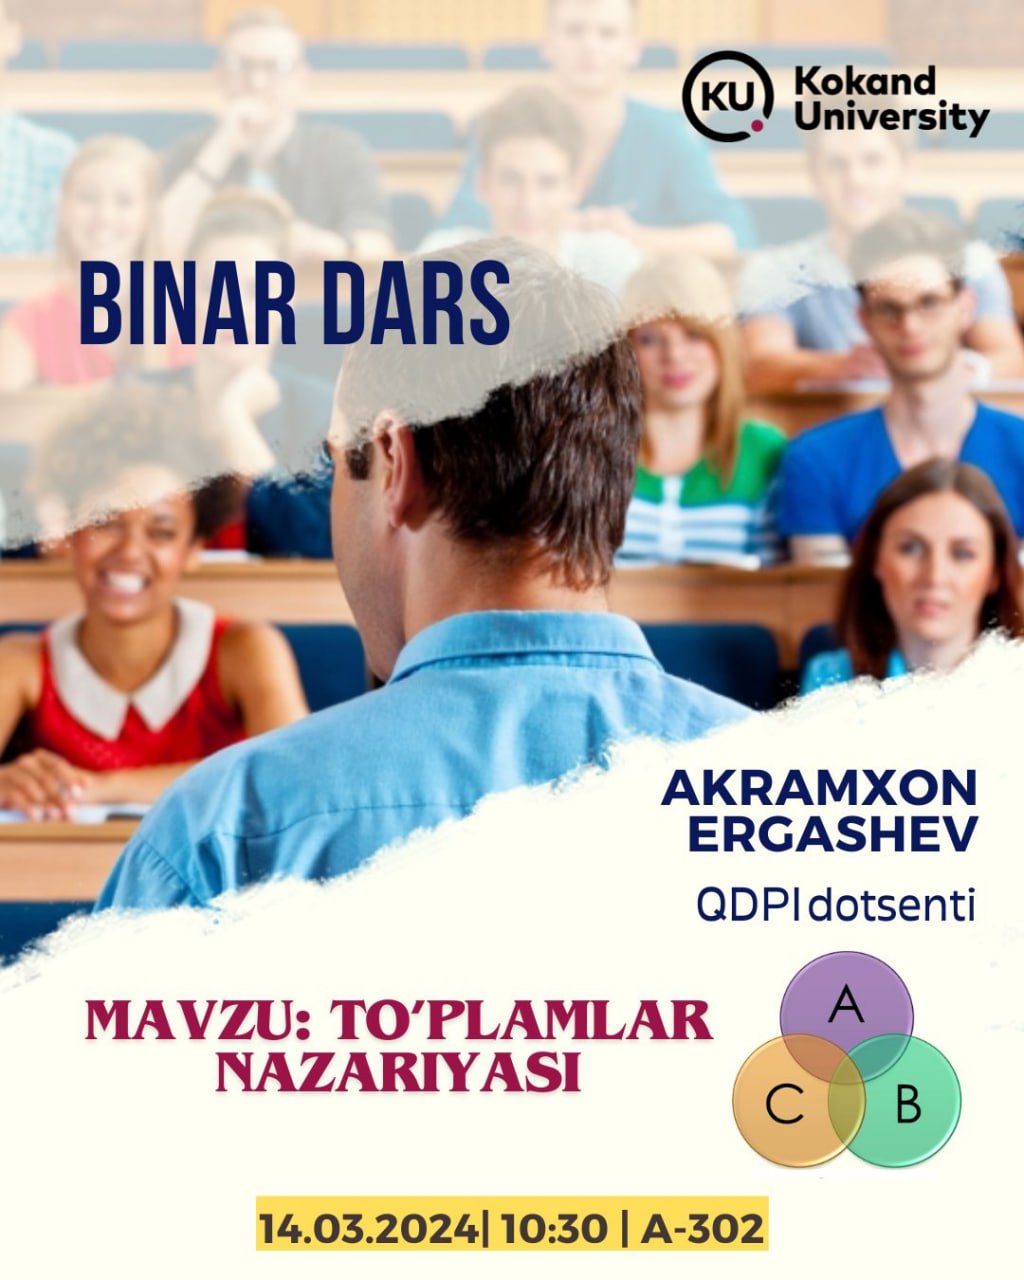 Kokand University students are invited to the upcoming binary lesson